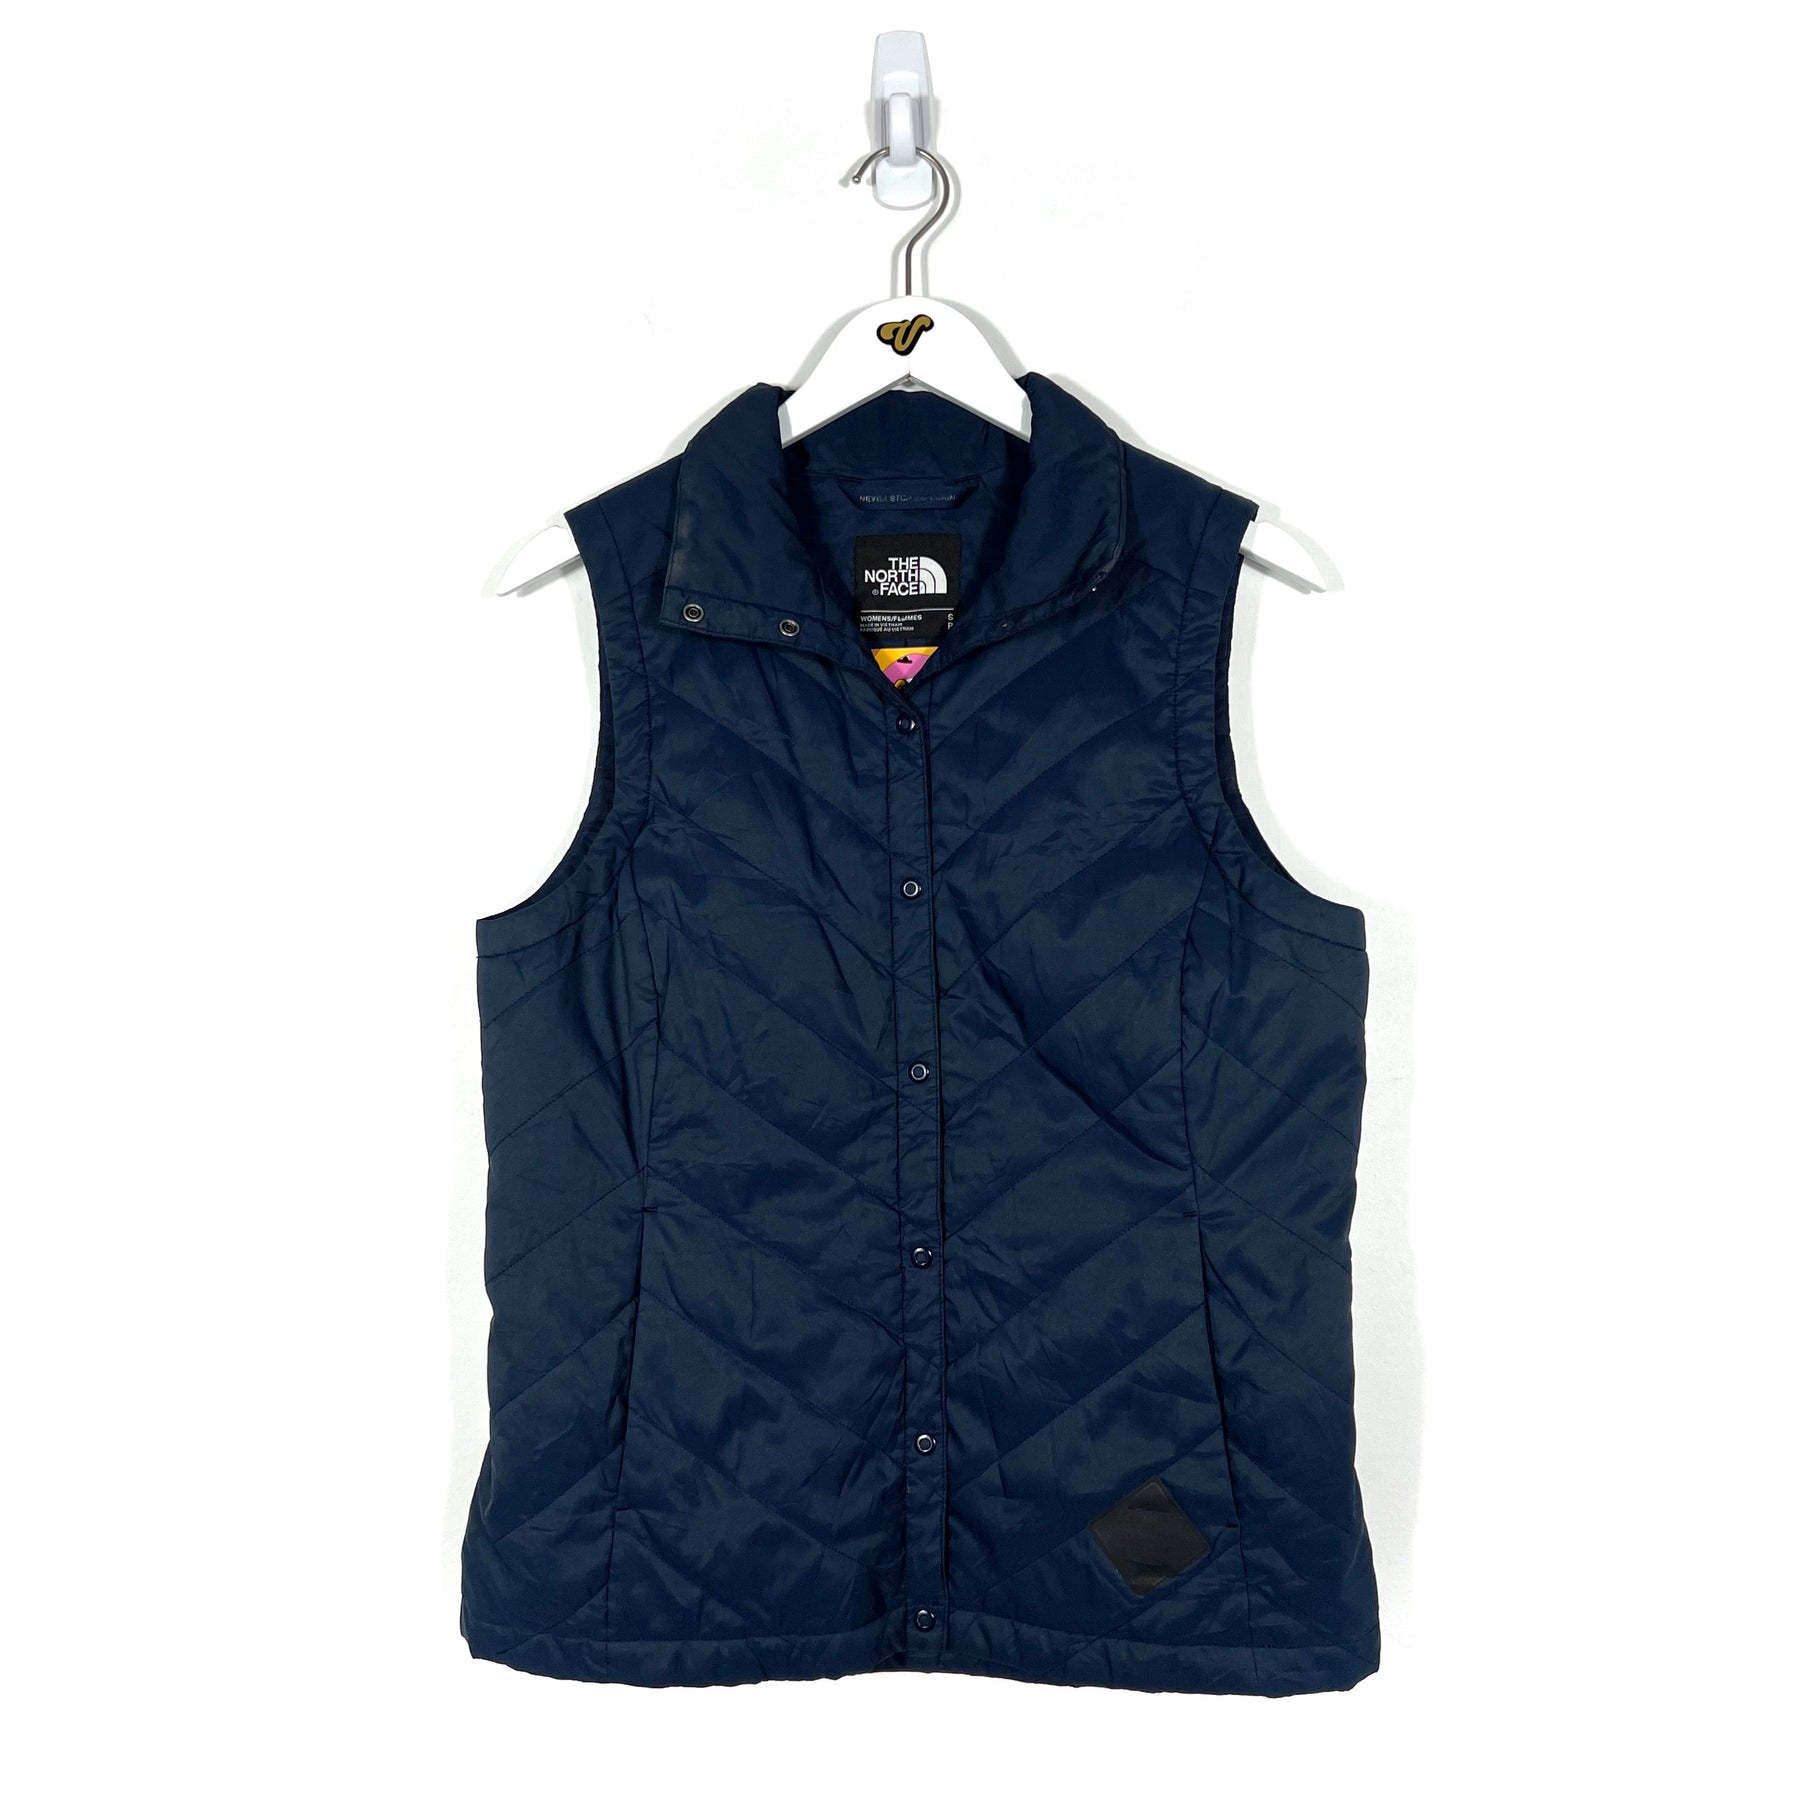 Vintage The North Face Lightweight Vest - Women's Small